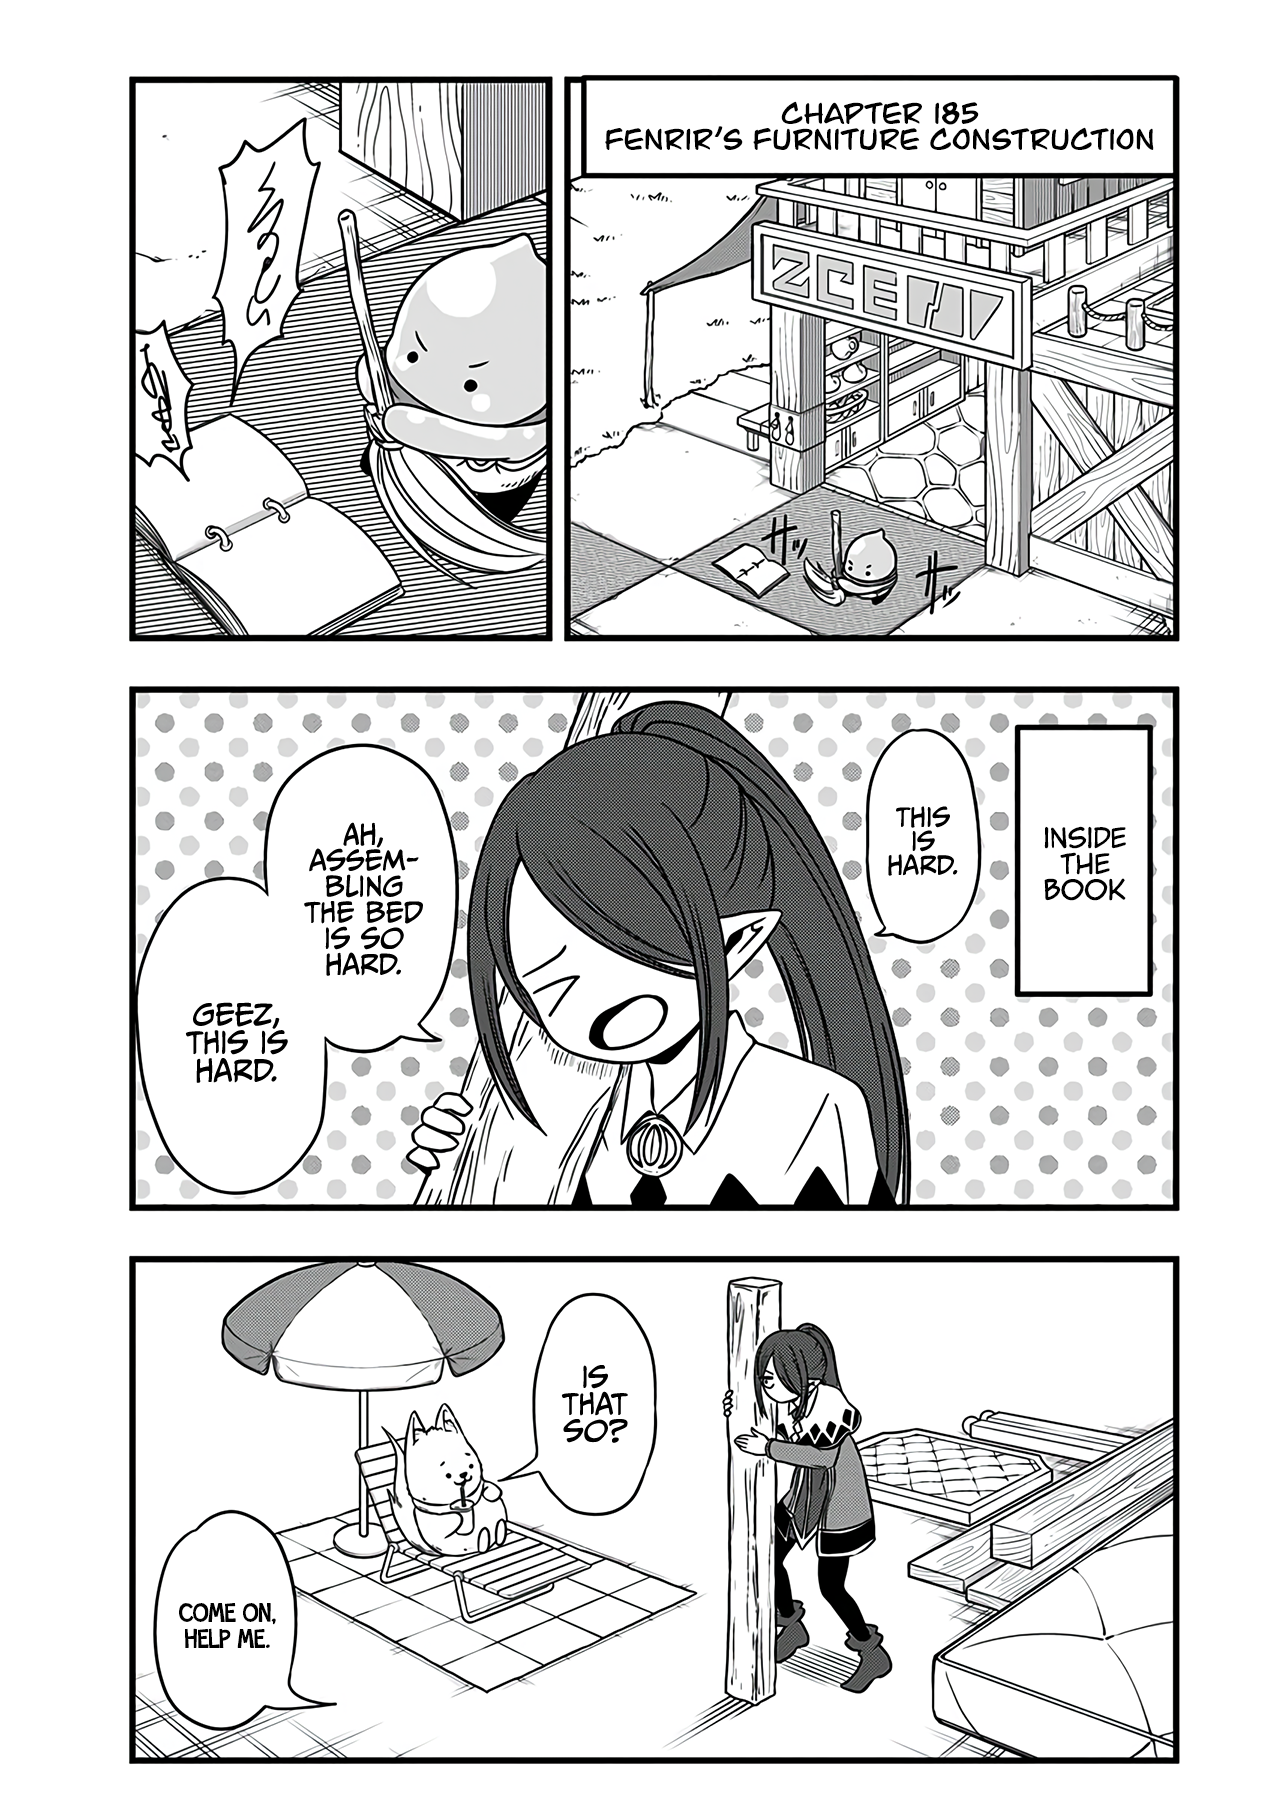 Slime Life Vol.7 Chapter 185: Fenrir's Furniture Contruction - Picture 1